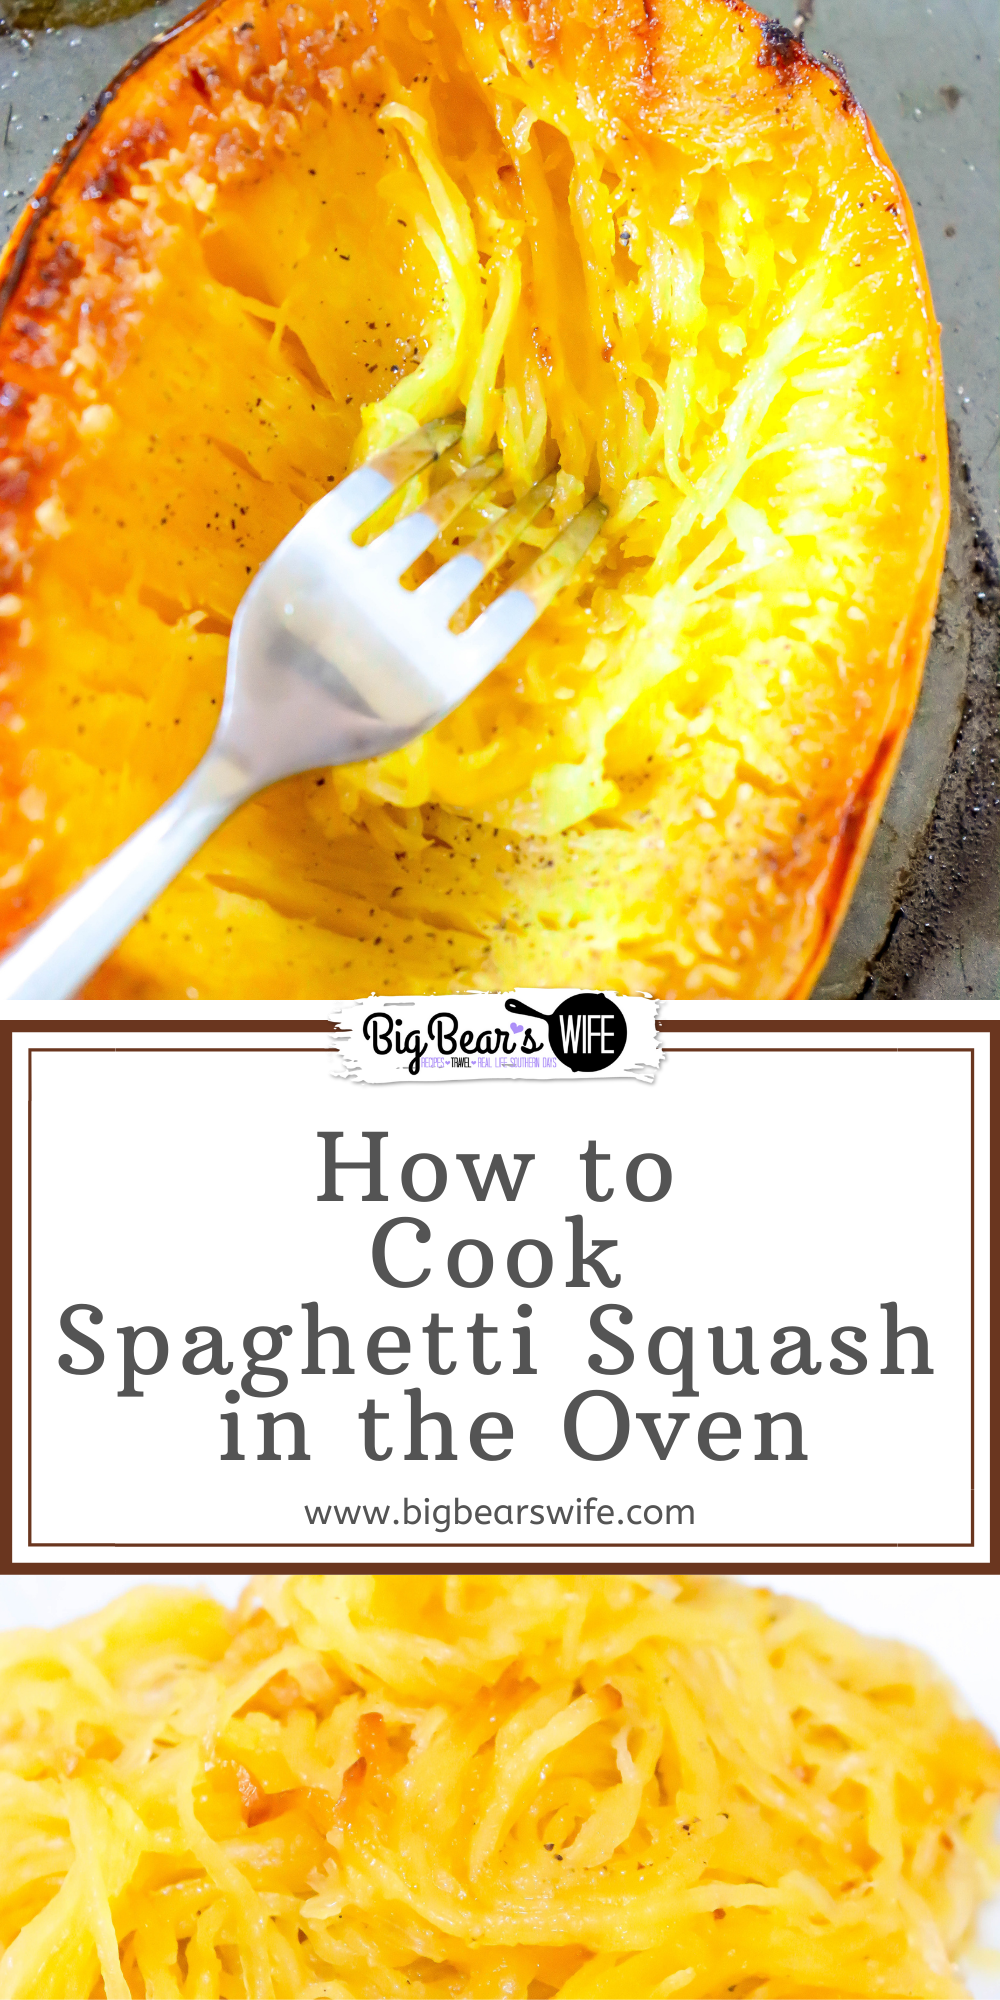 Trying to learn How to Cook Spaghetti Squash in the Oven? I'll show you how I love to cook prep and cook Spaghetti Squash! via @bigbearswife